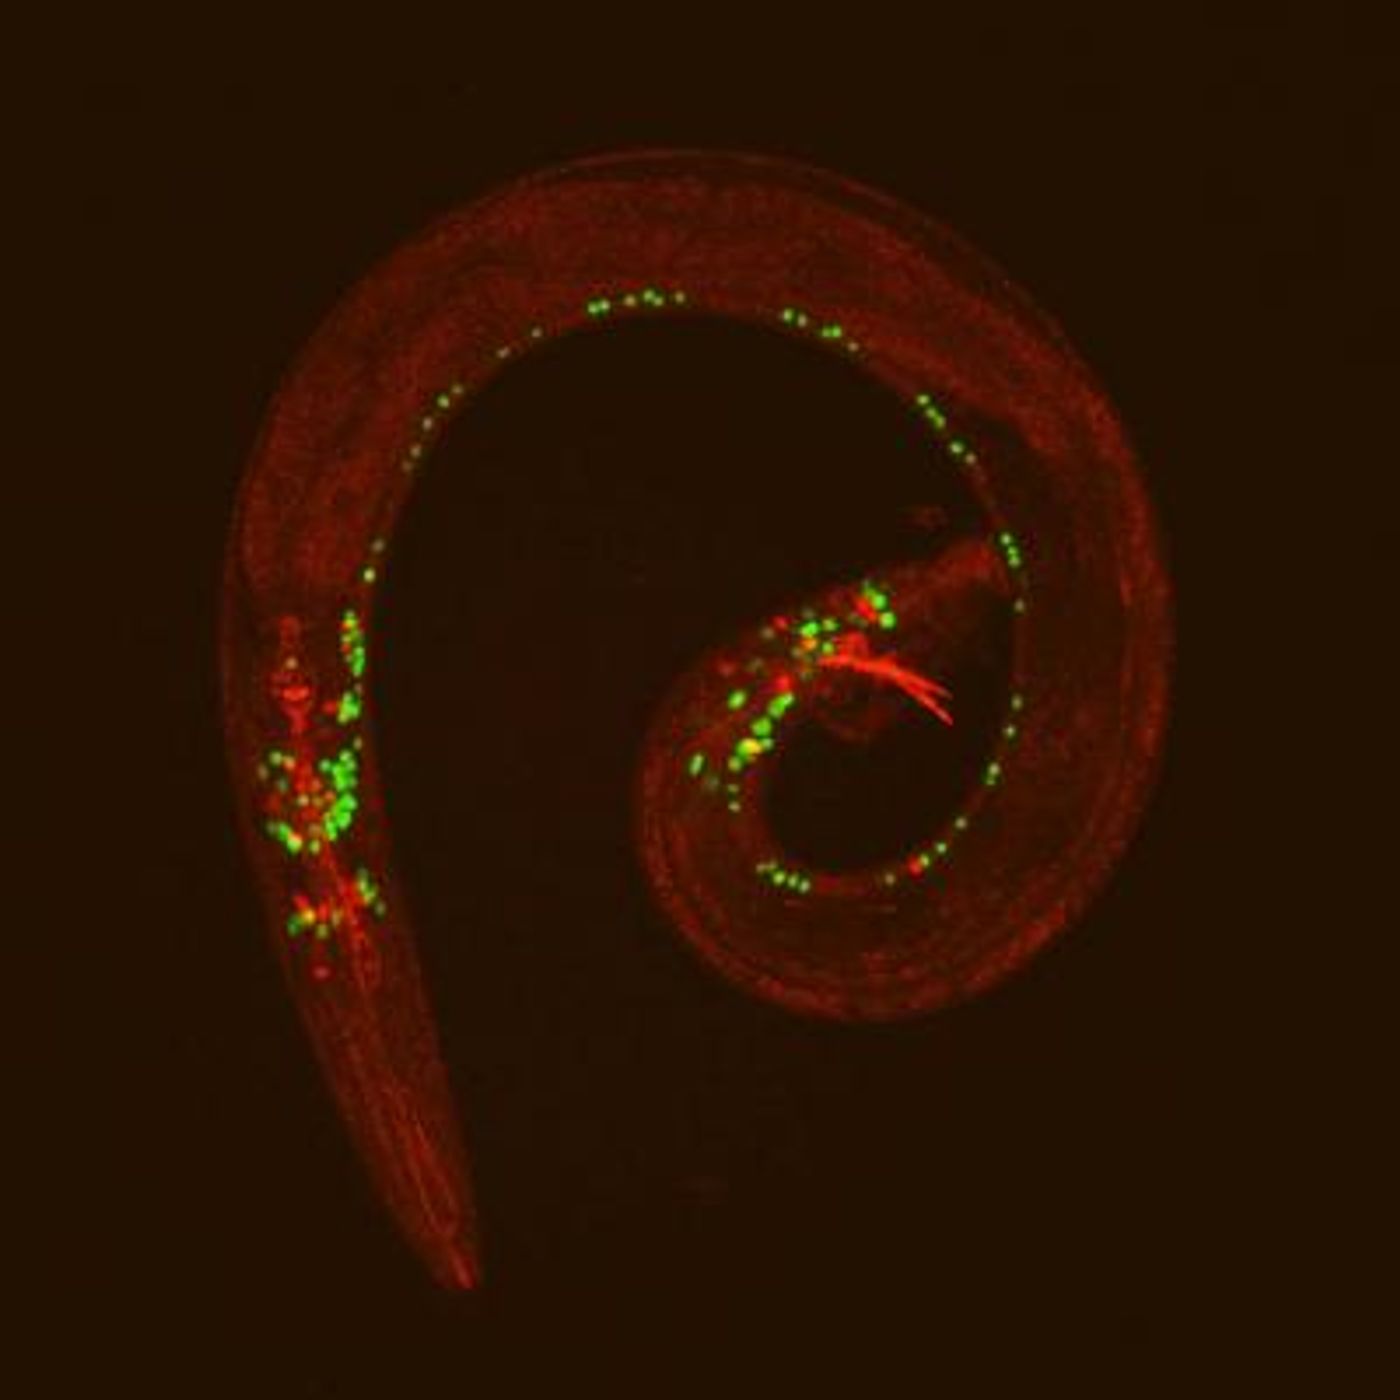 The nervous system of male roundworms is distinct from that of females. Some of the neurons that only exist in one sex are labeled with green and red fluorescent proteins. / Credit: Laura Pereira and Esther Serrano-Saiz.